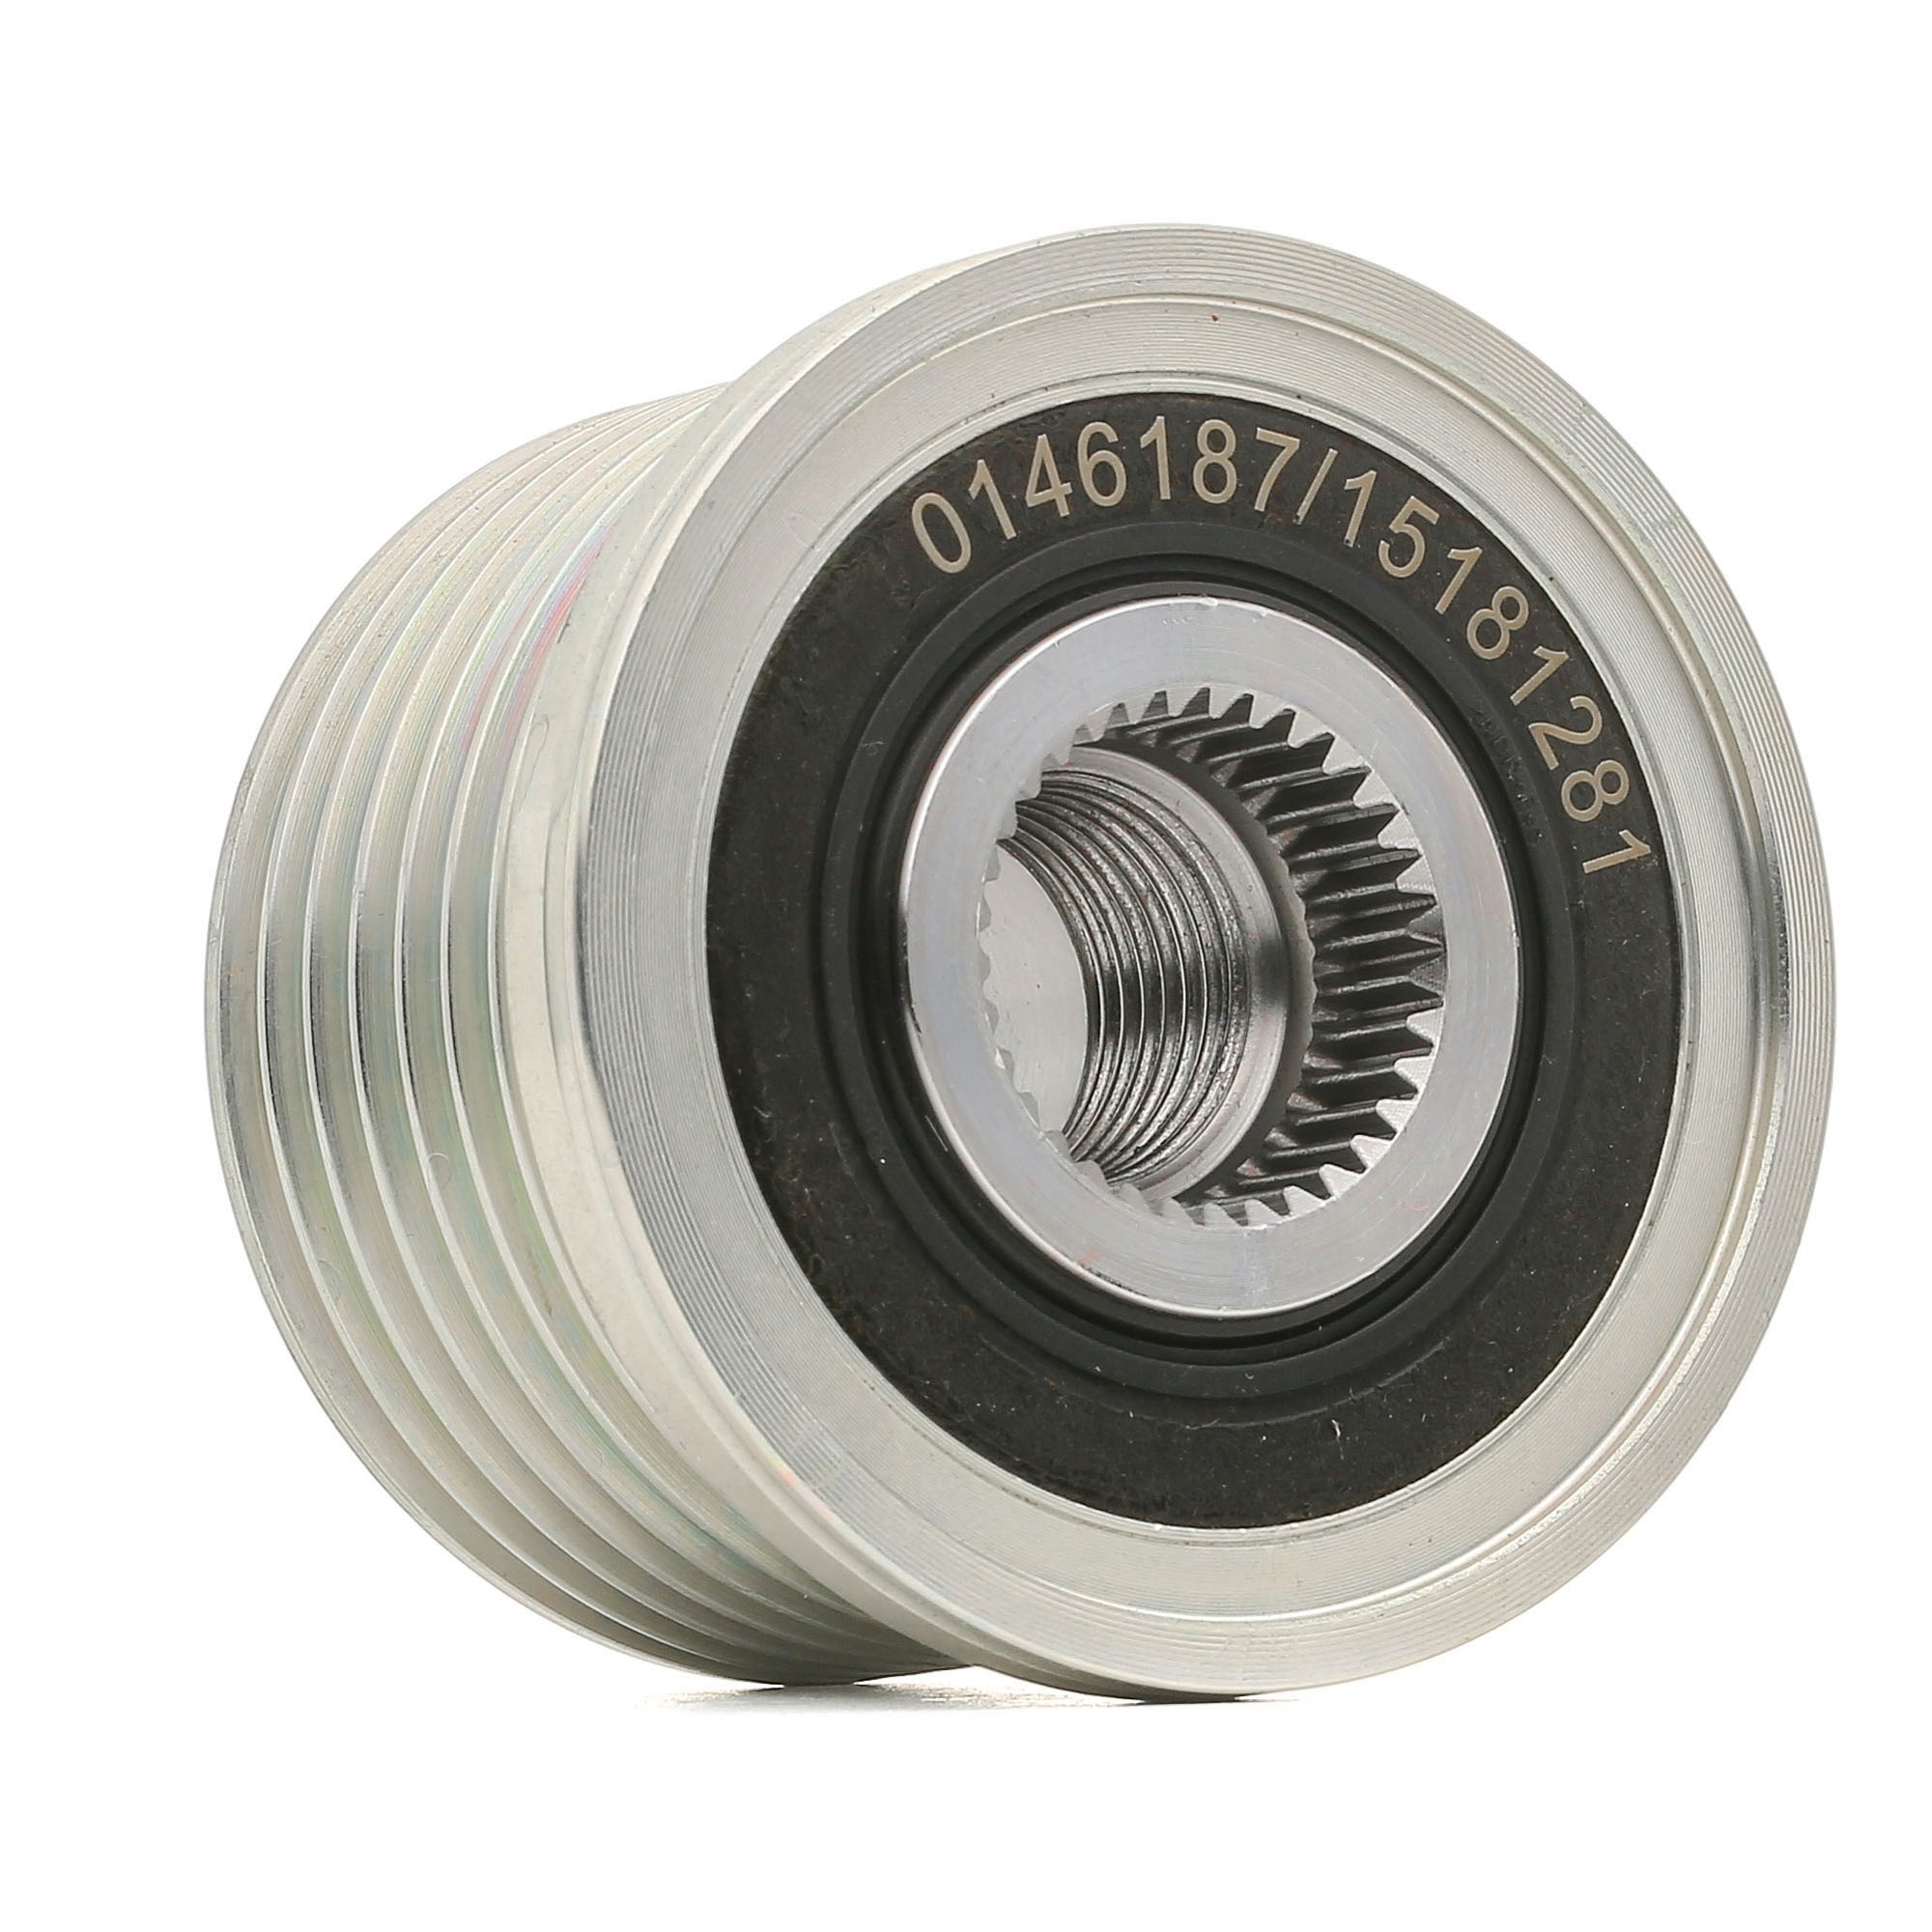 STARK SKFC-1210093 Alternator Freewheel Clutch Width: 34,4mm, Requires special tools for mounting